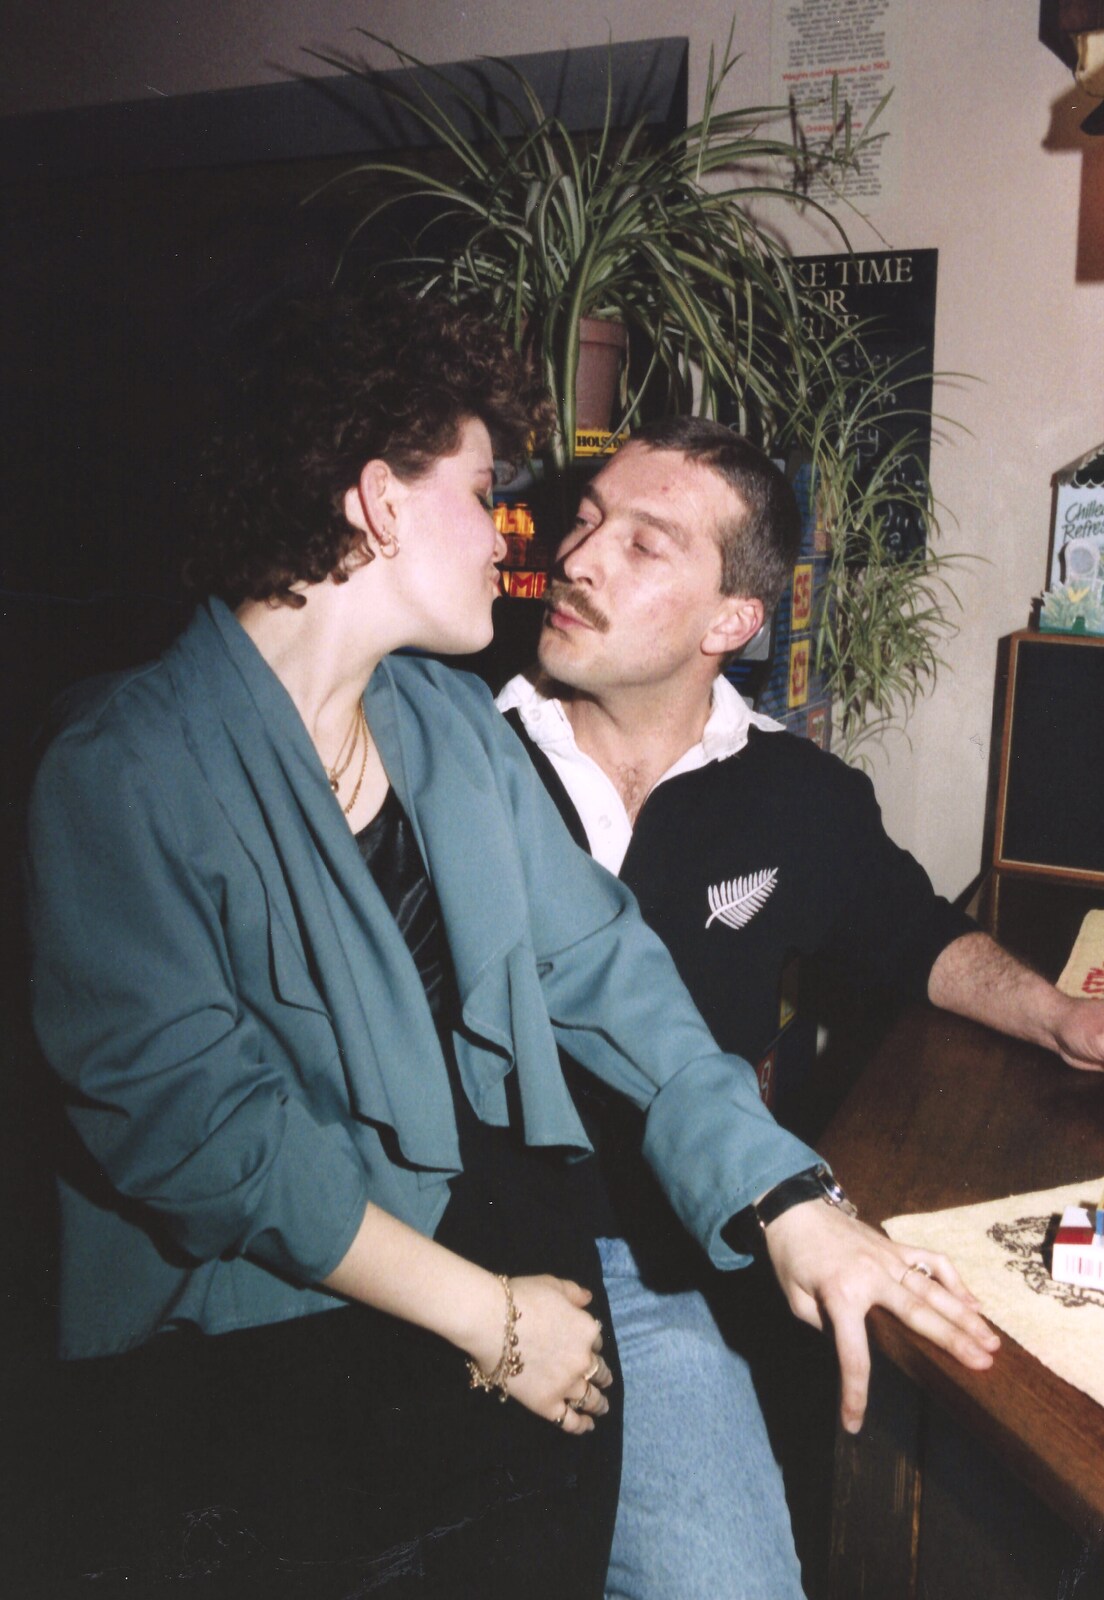 BPCC Printec Reunion at The Brome Swan, Suffolk - 20th February 1991: Kelly pretends to kiss Paul the builder